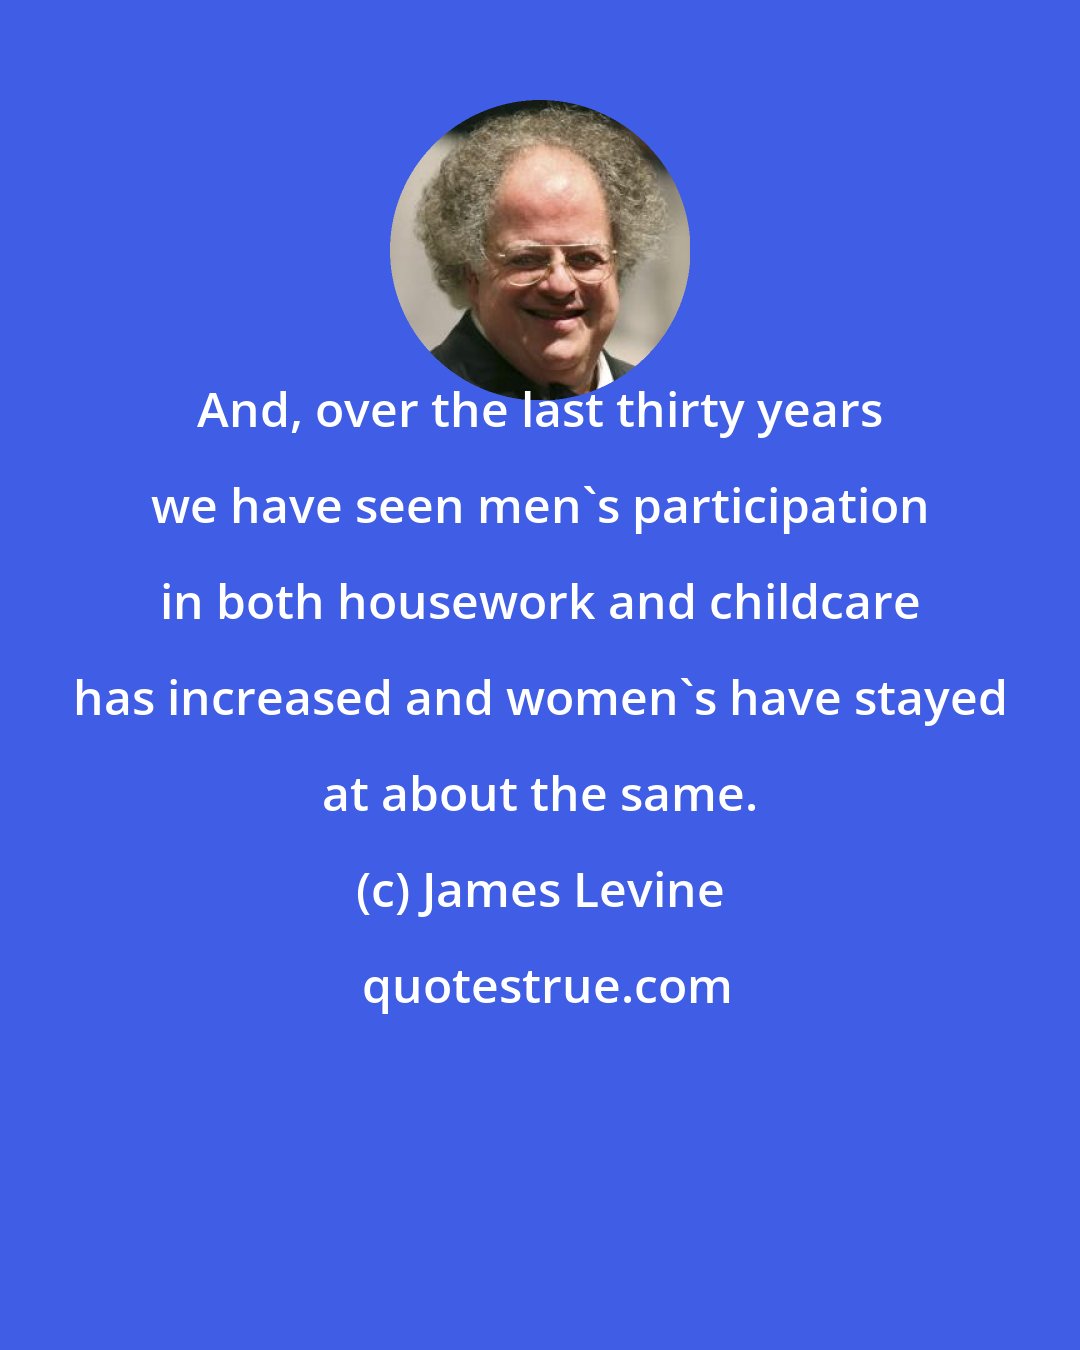 James Levine: And, over the last thirty years we have seen men's participation in both housework and childcare has increased and women's have stayed at about the same.